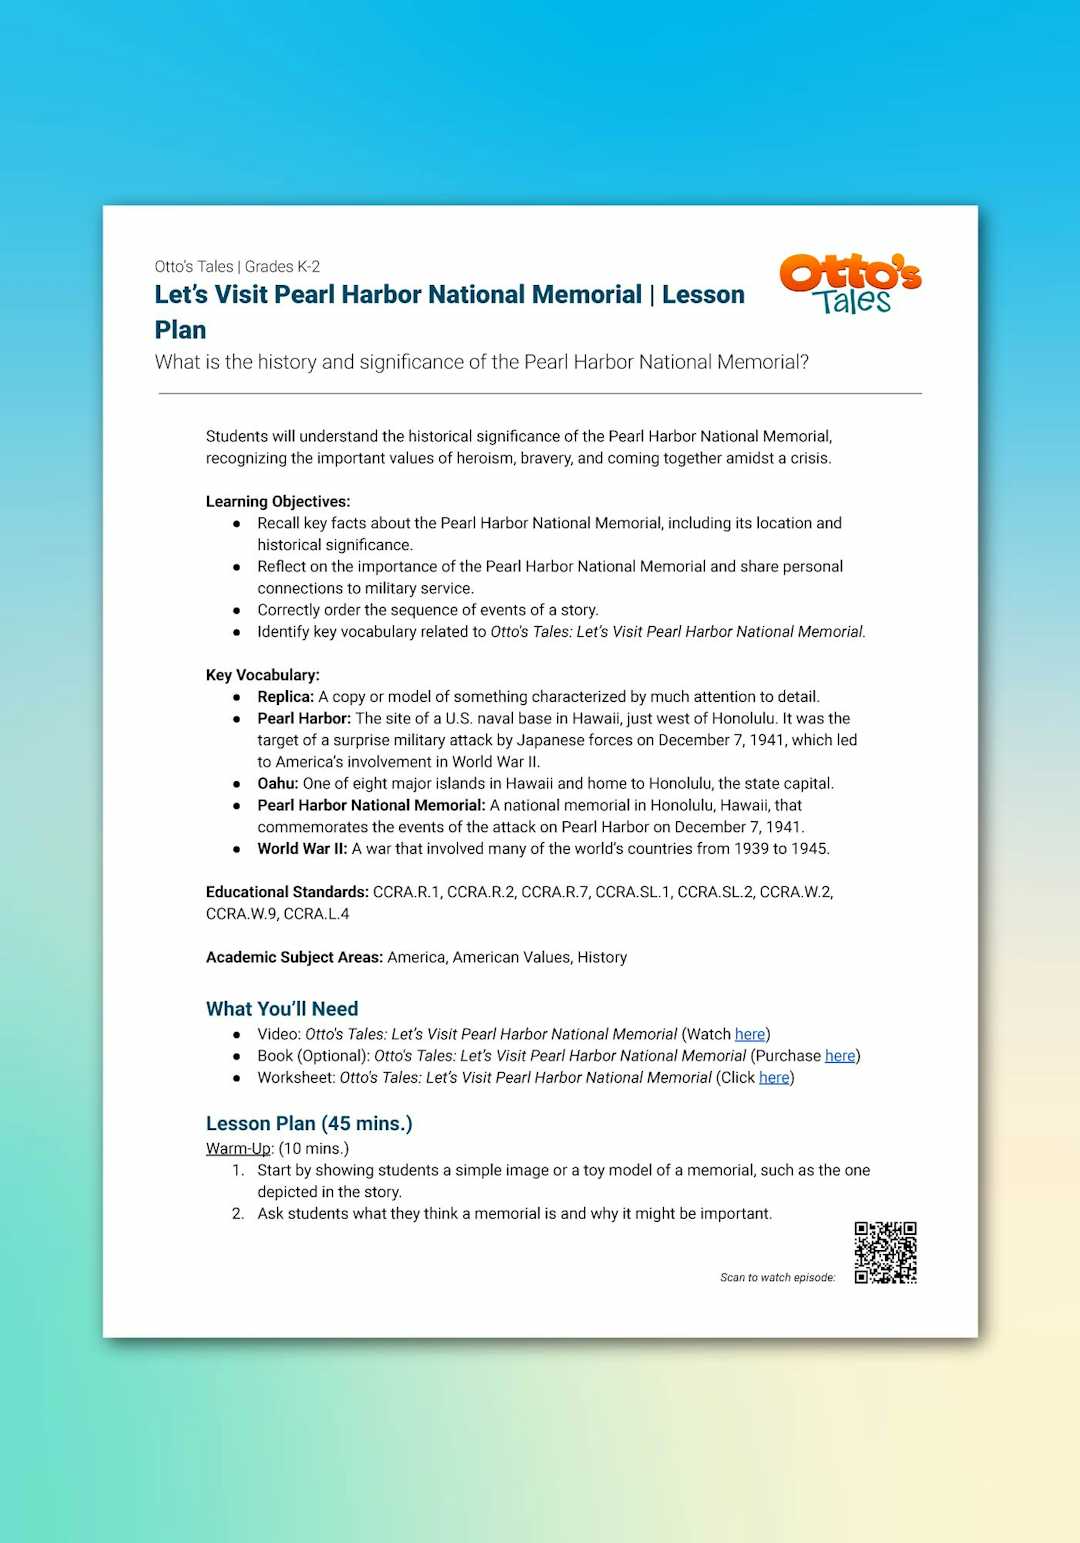 "Otto's Tales: Let's Visit Pearl Harbor National Memorial" Lesson Plan